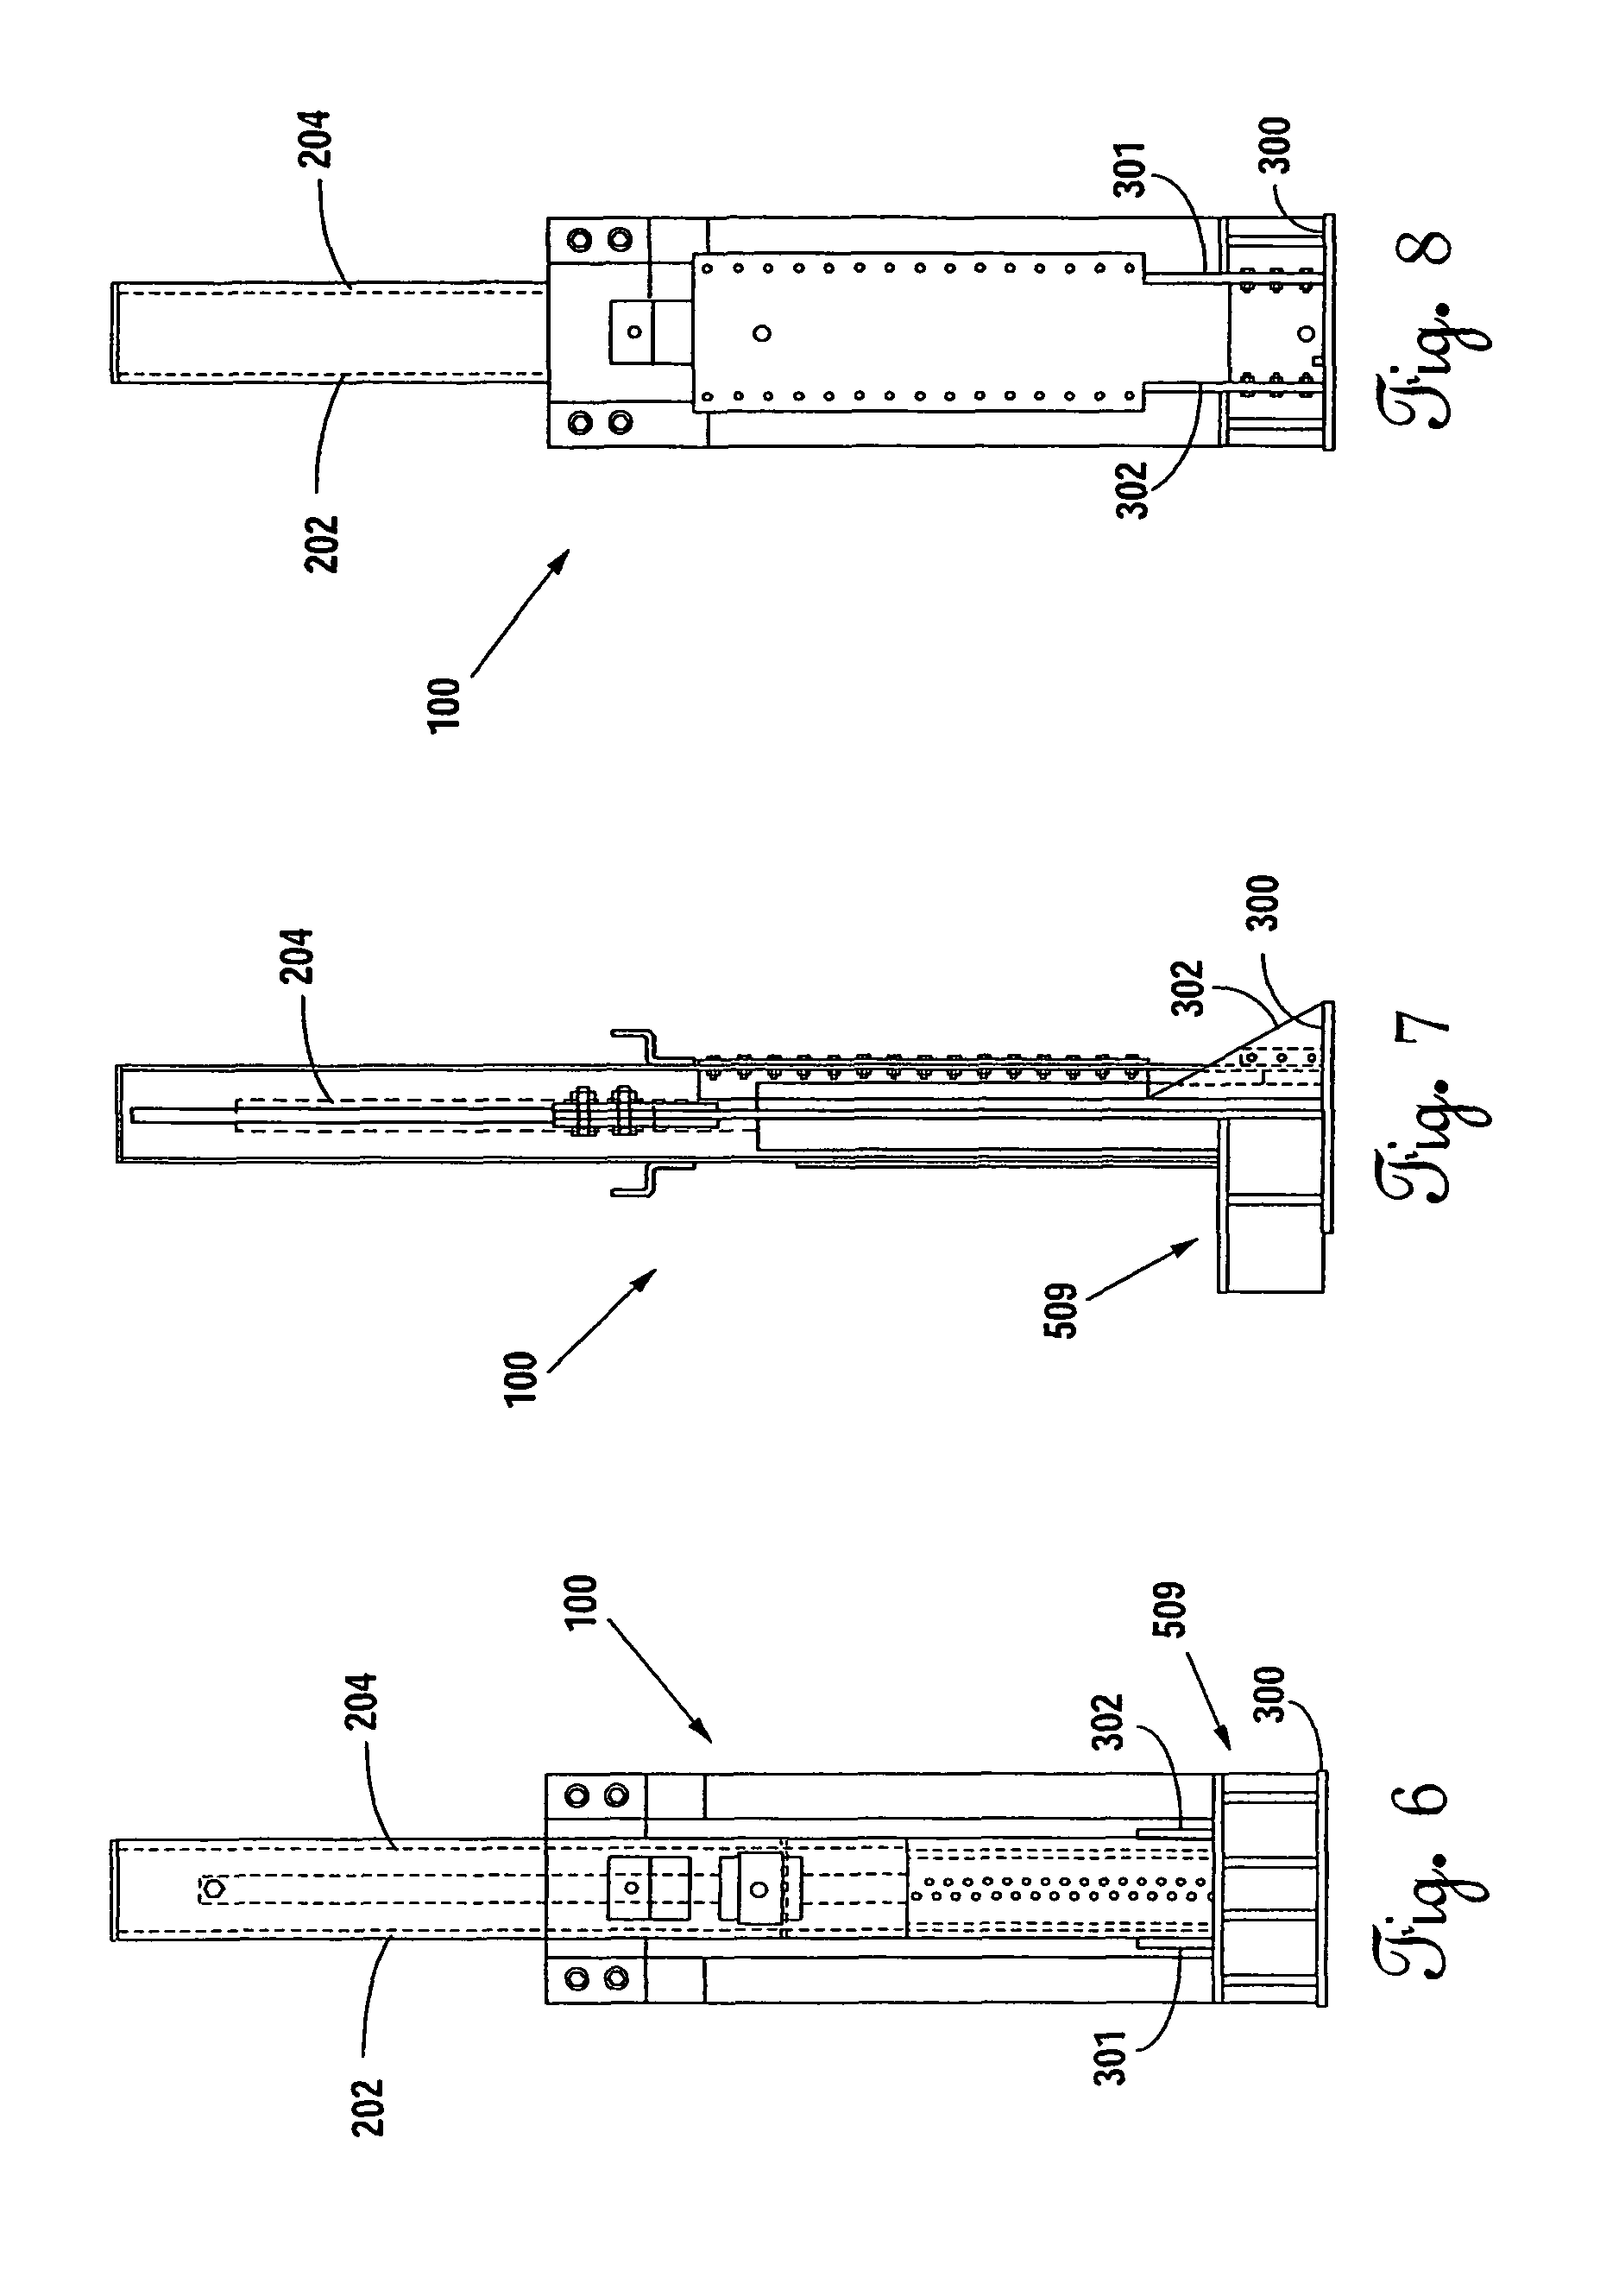 Lifting system and method for lifting bulk sized, high weight objects